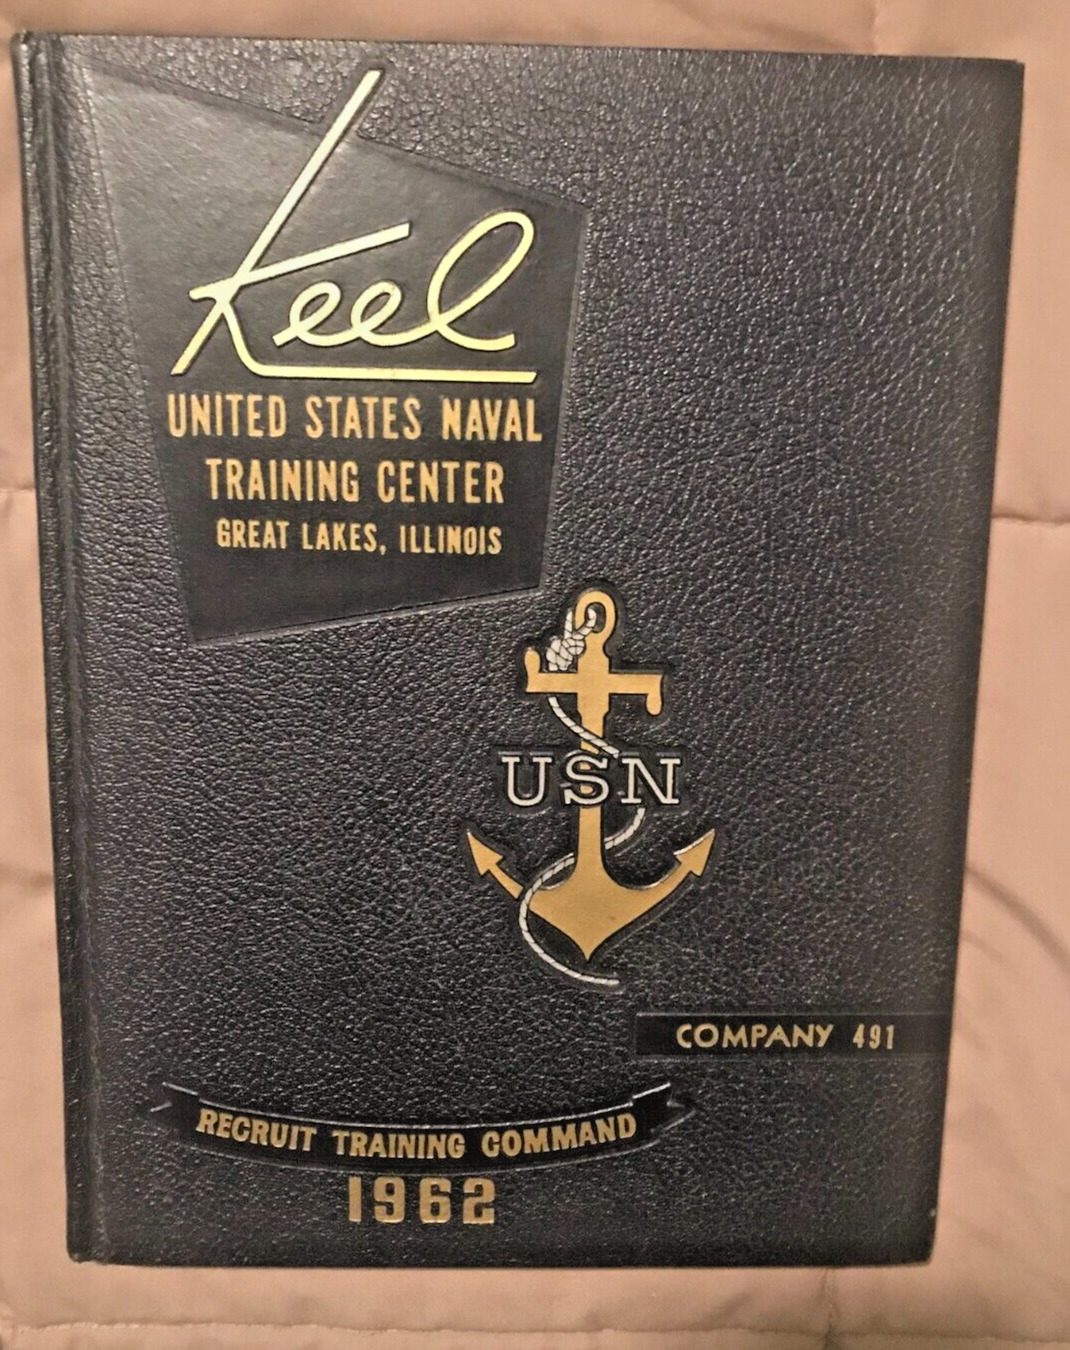 KEEL - GREAT LAKES U.S. NAVAL TRAINING CENTER YEARBOOK 1962 Company 491 HC